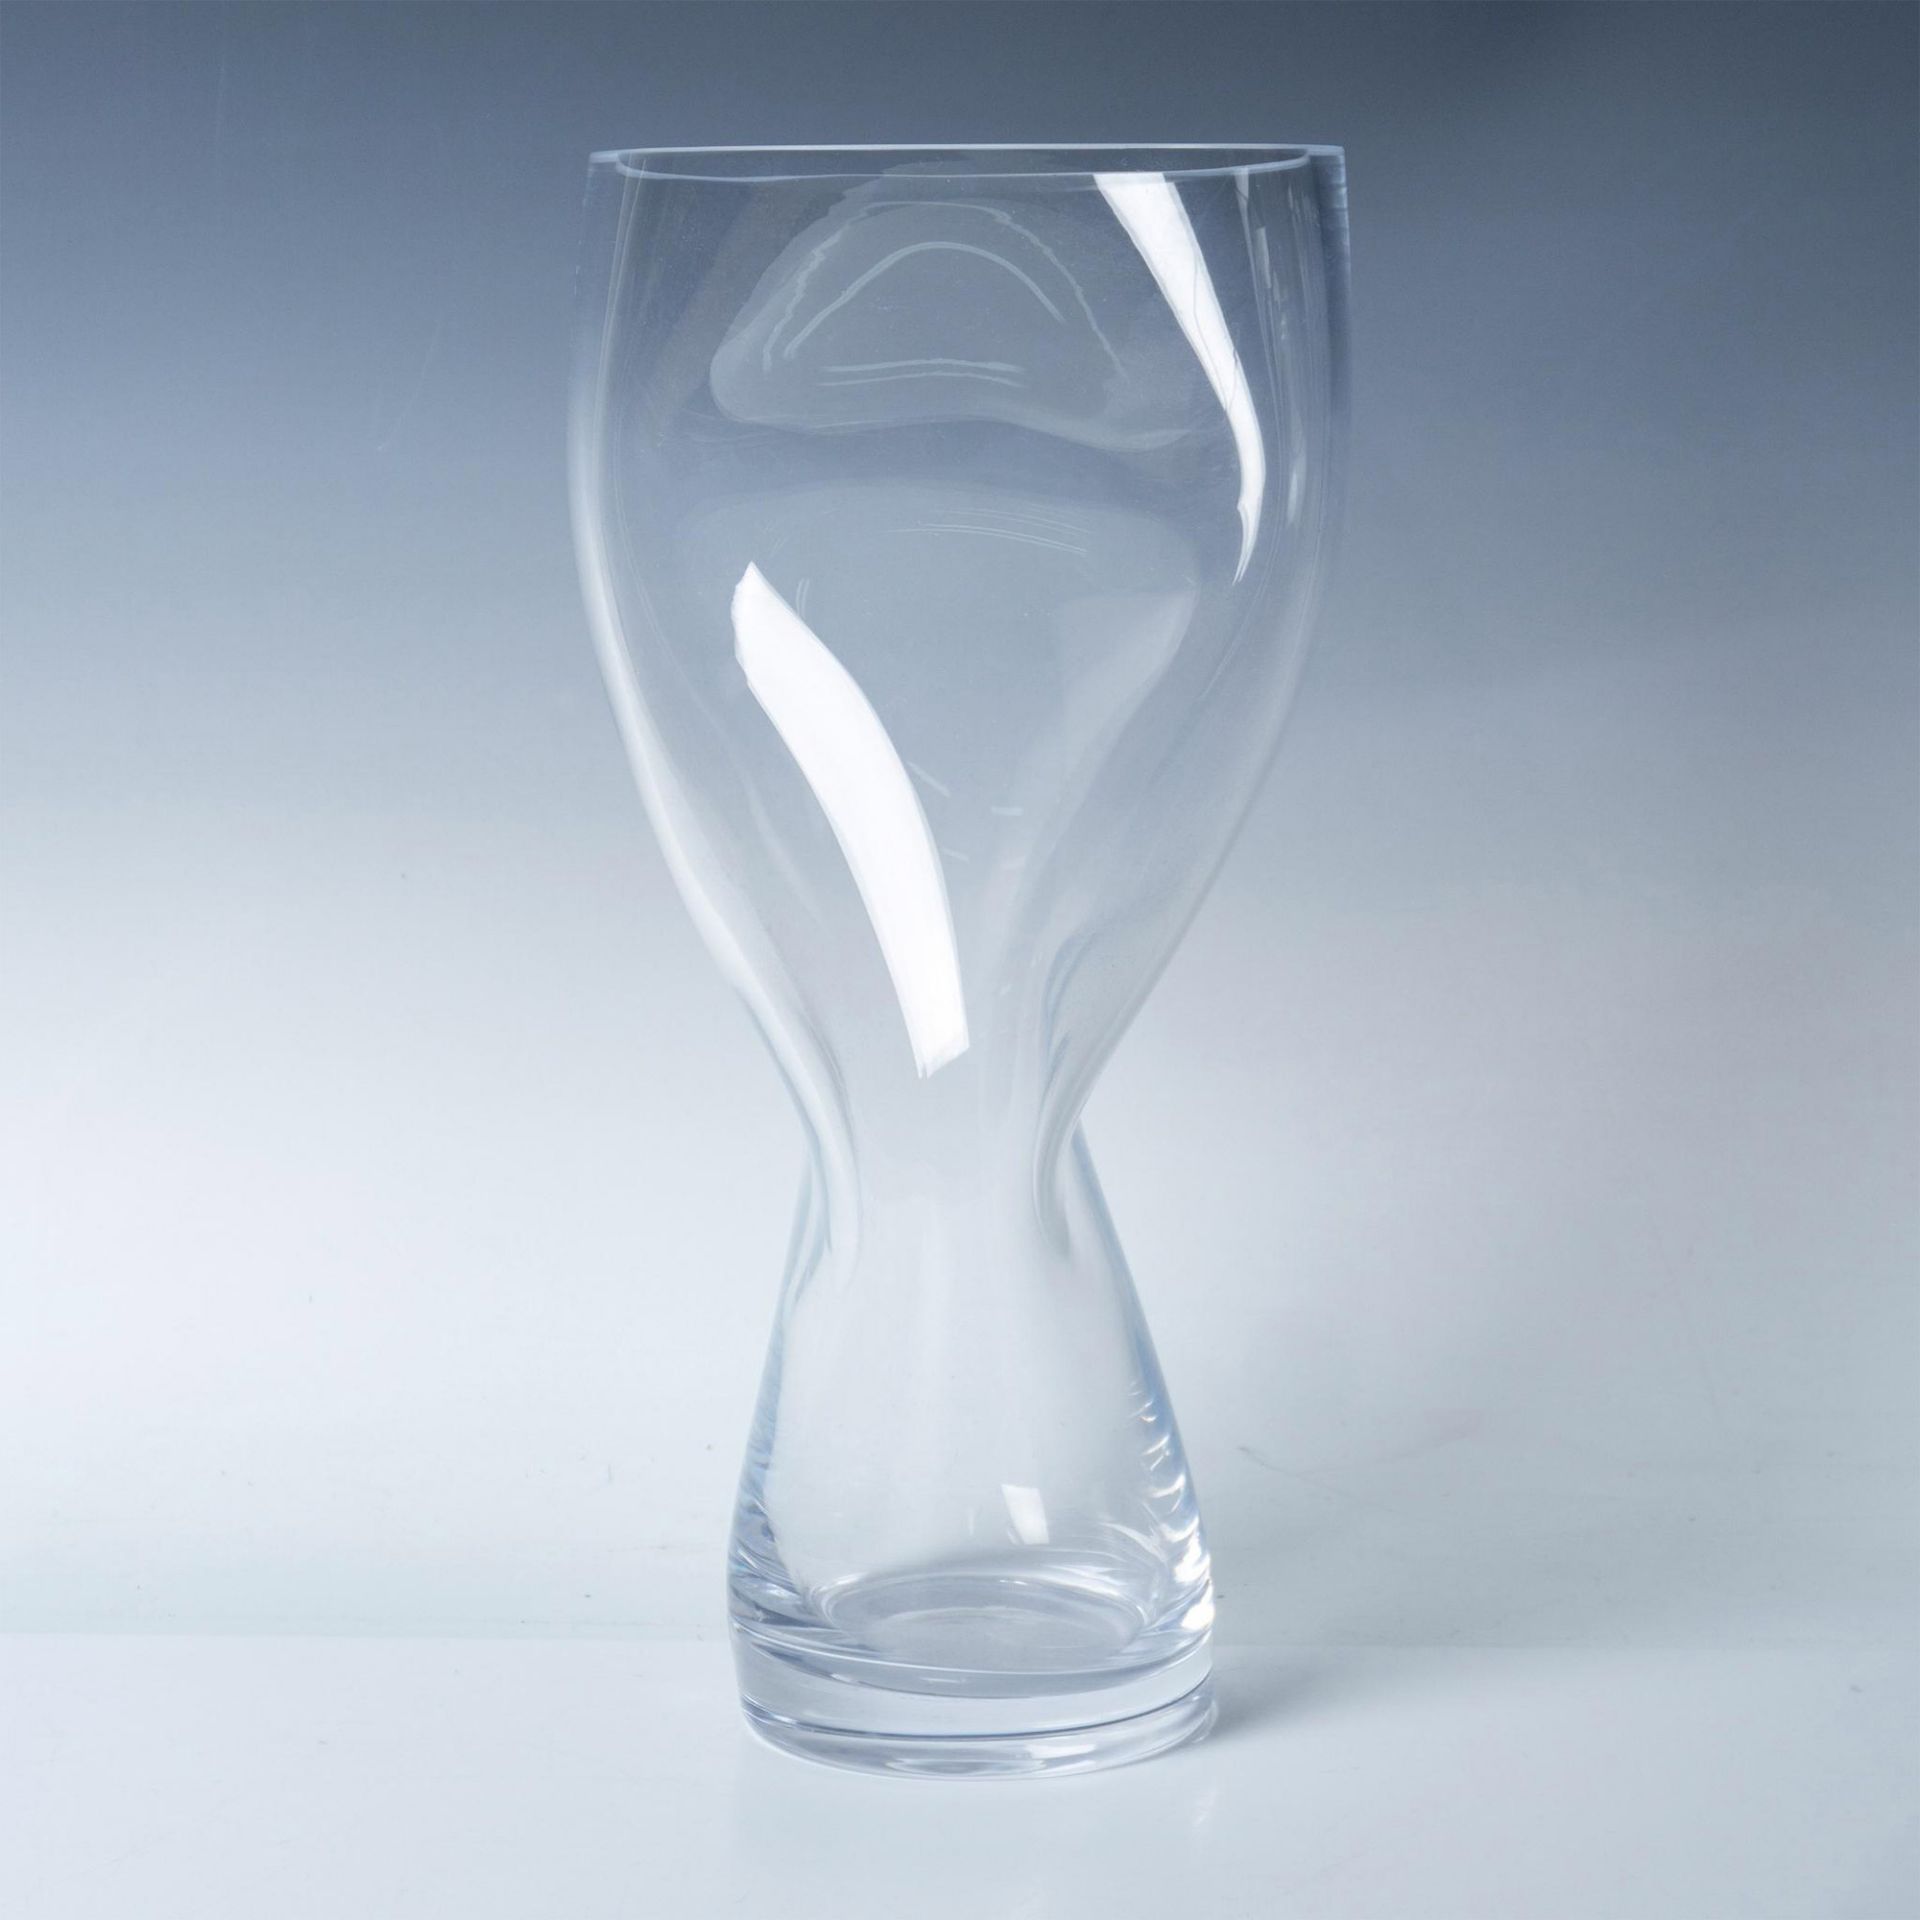 Orrefors Clear Crystal Vase, Squeeze Pattern - Image 3 of 5